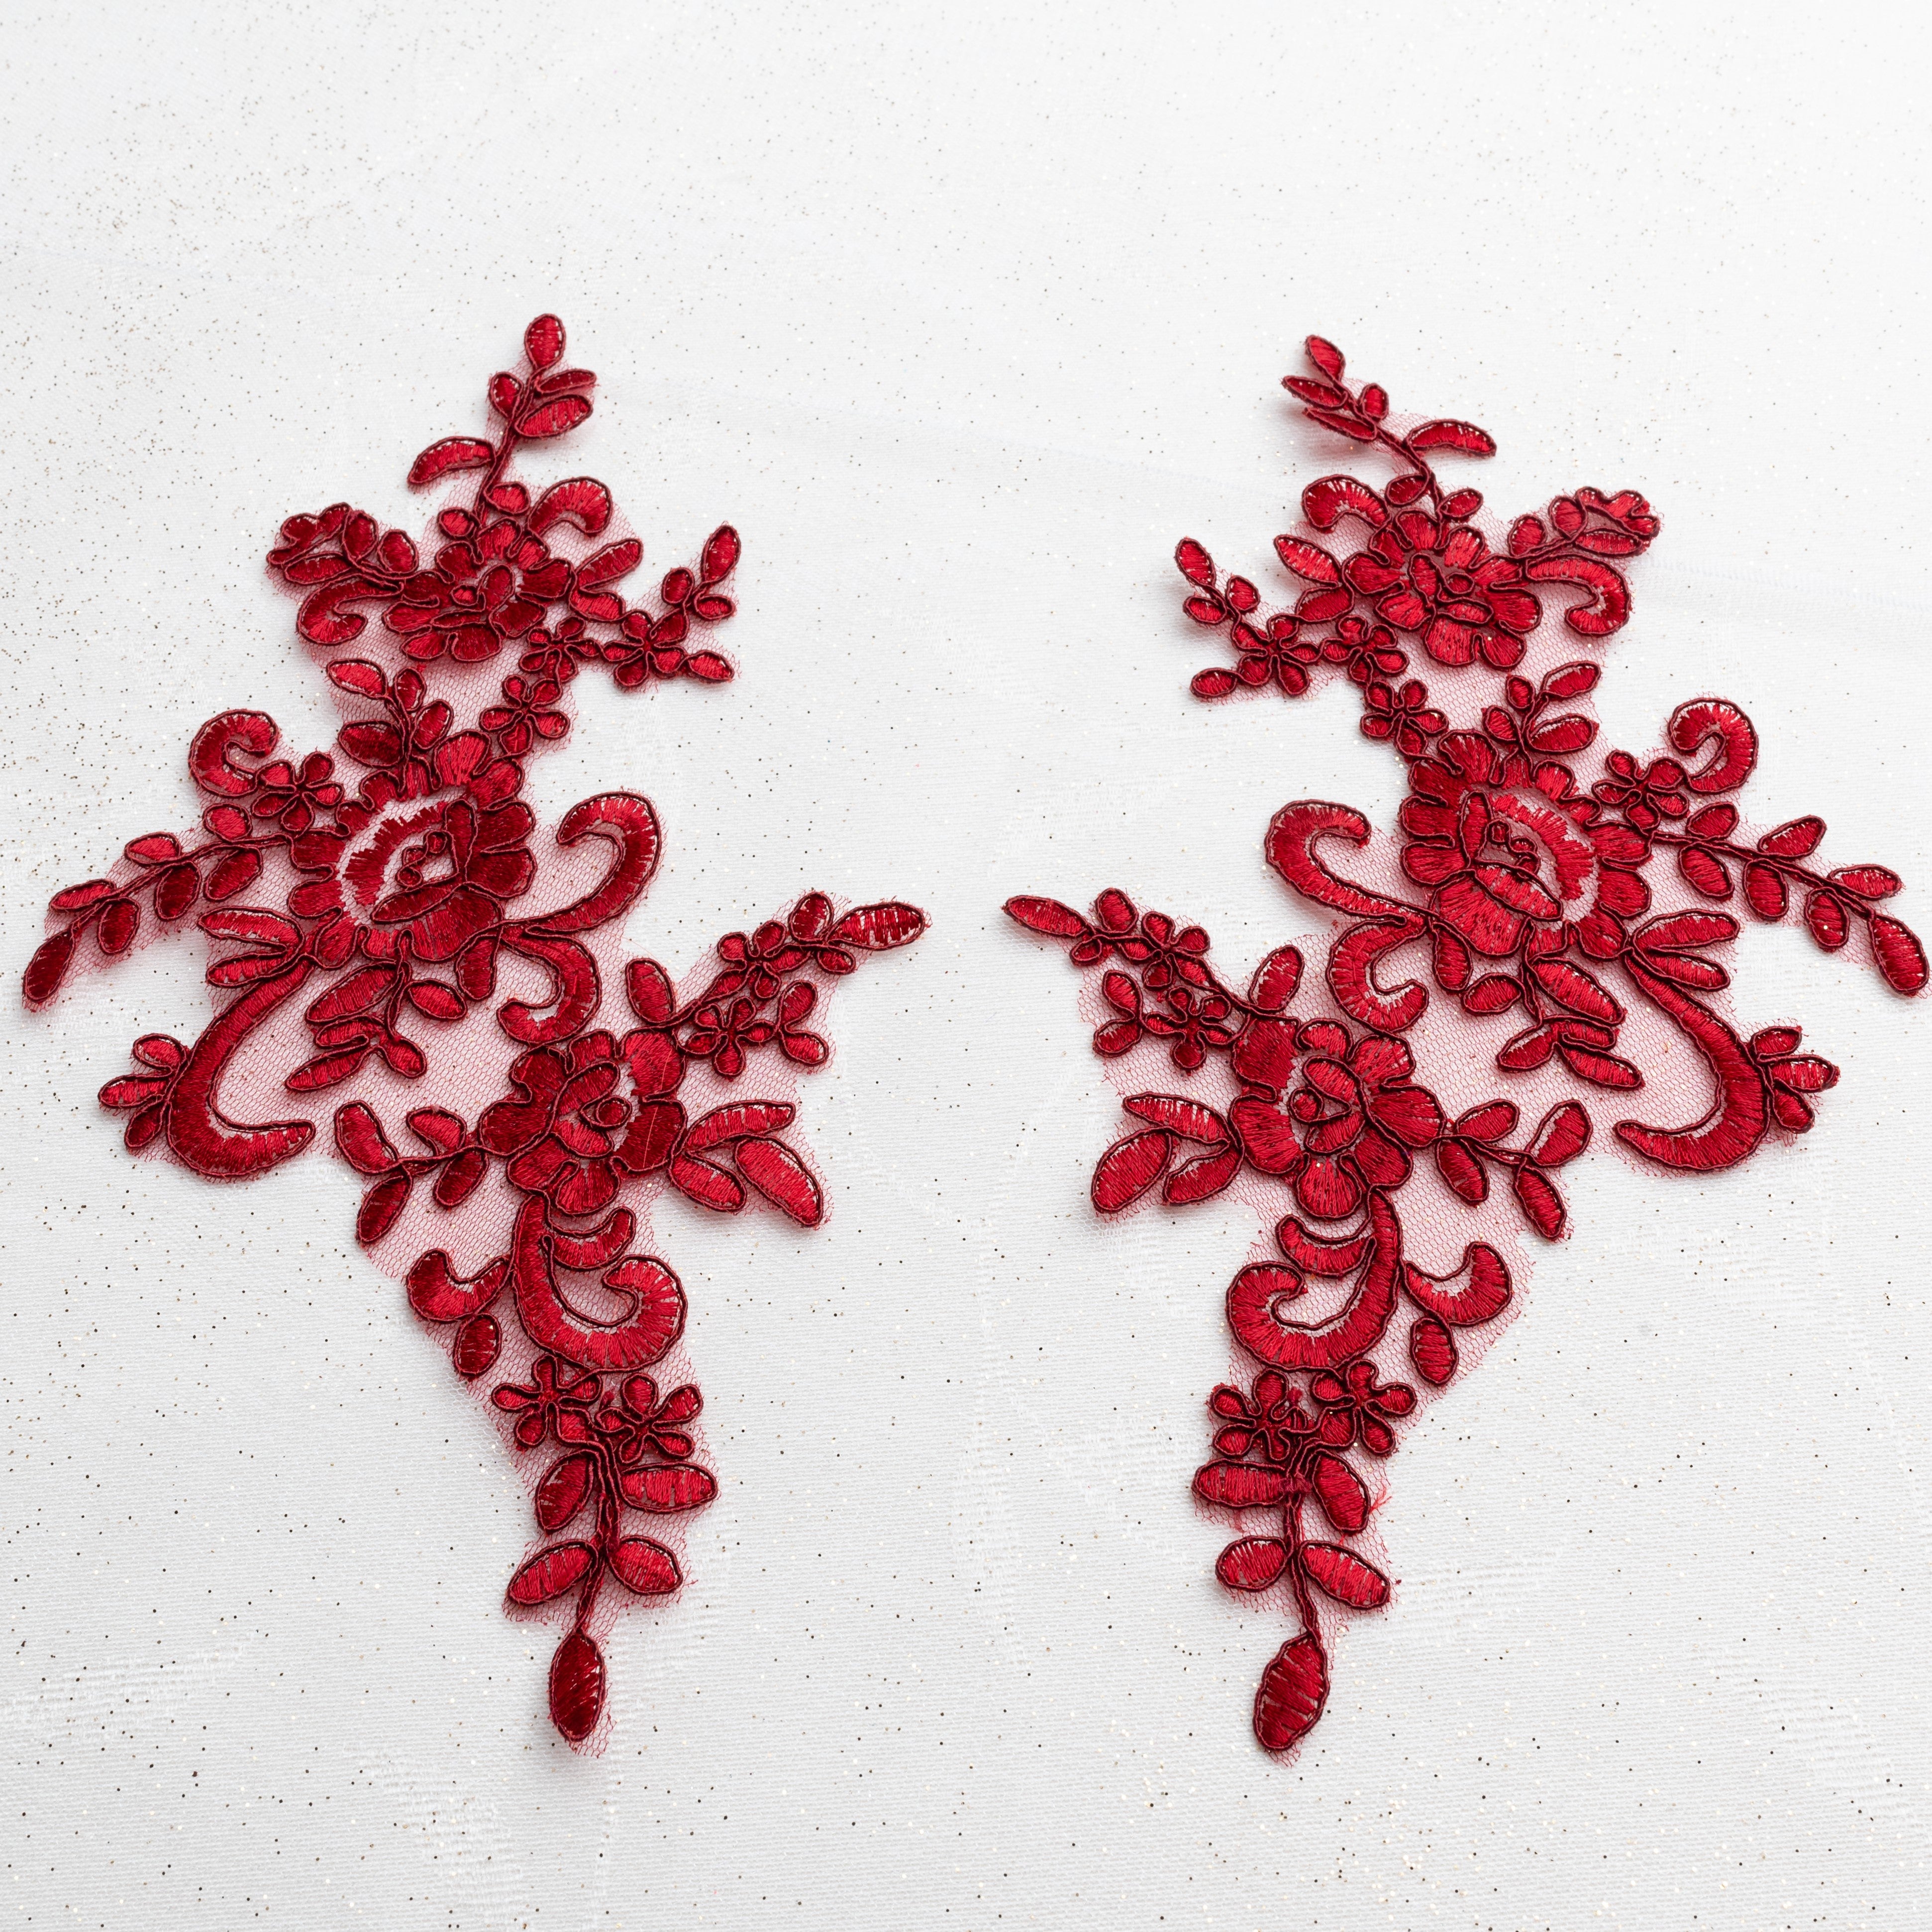 Mirrored pair of burgundy red corded appliques with a floral design and embroidered onto a fine net backing.